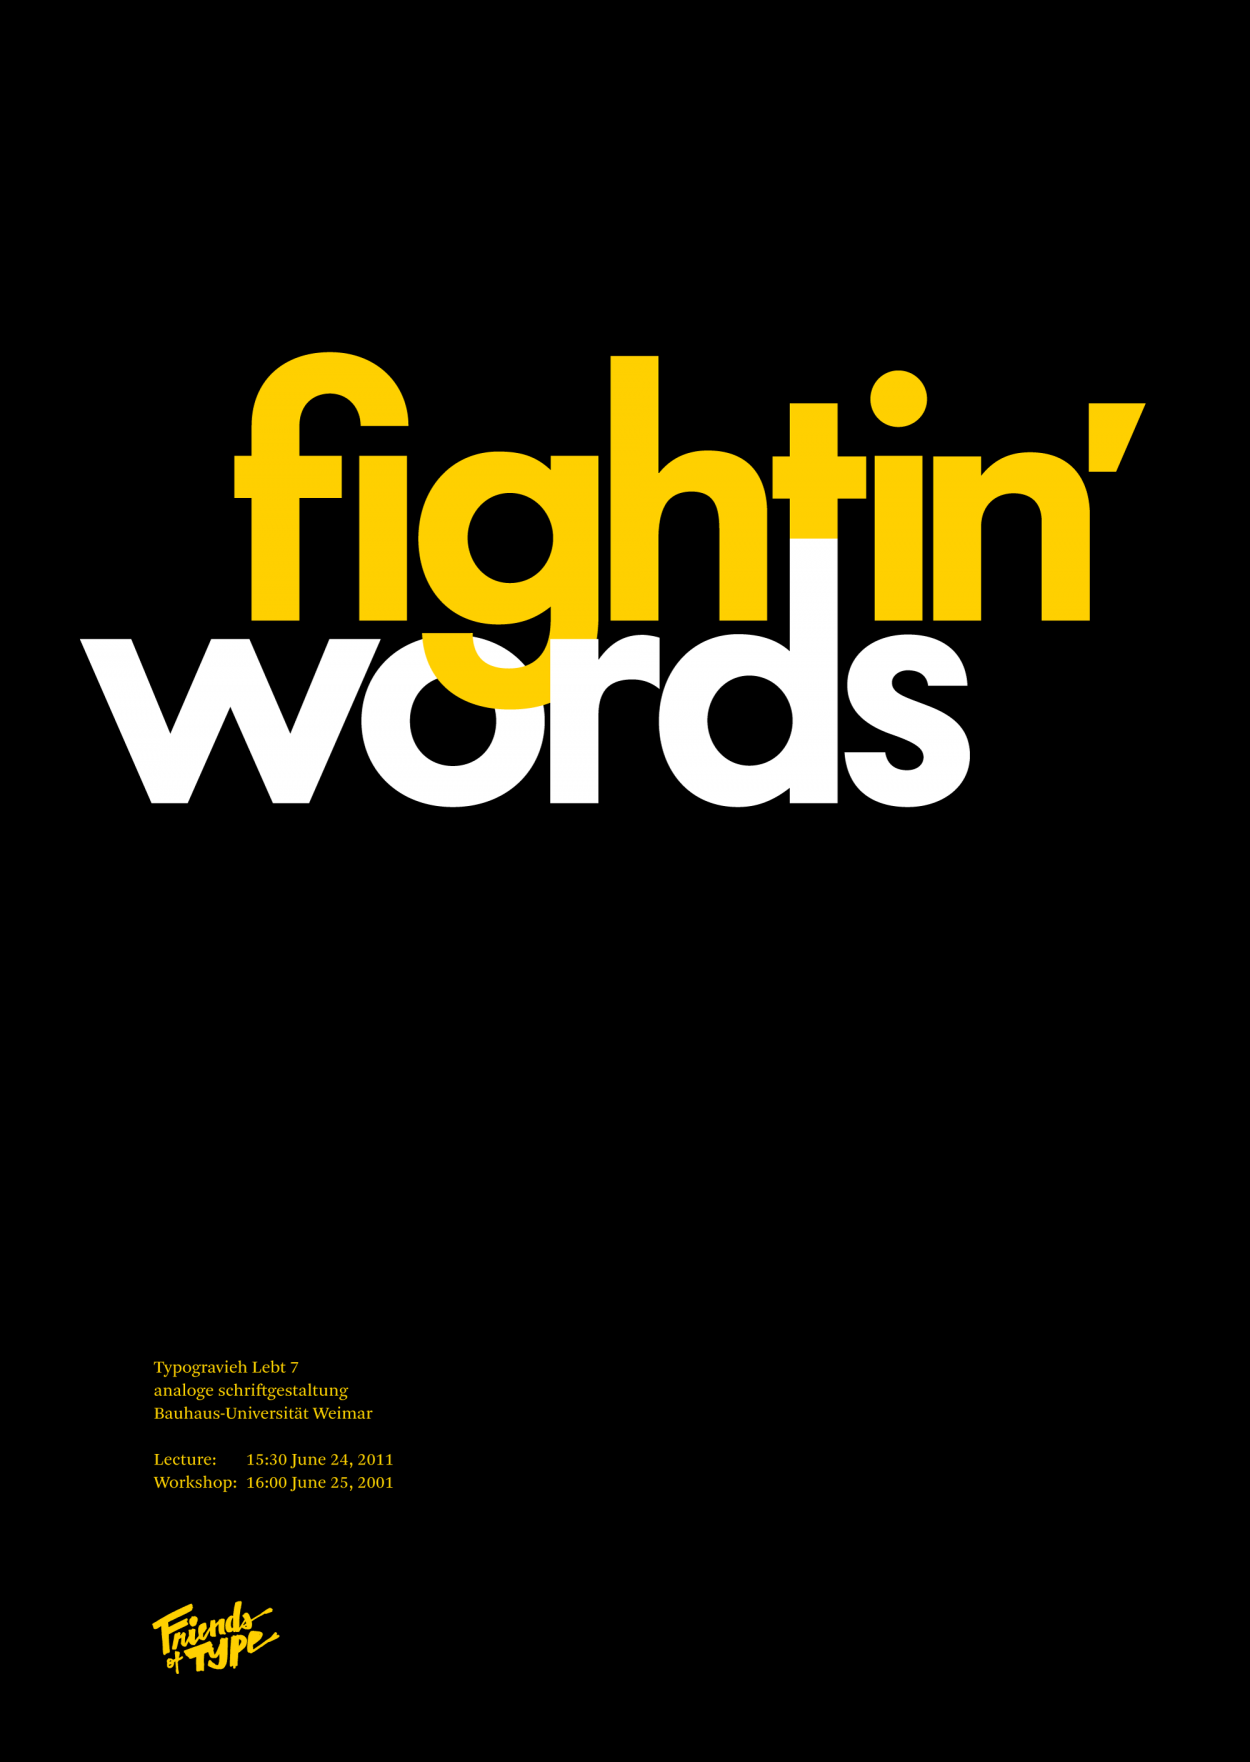 Fightin Words, Bauhaus lecture and workshop